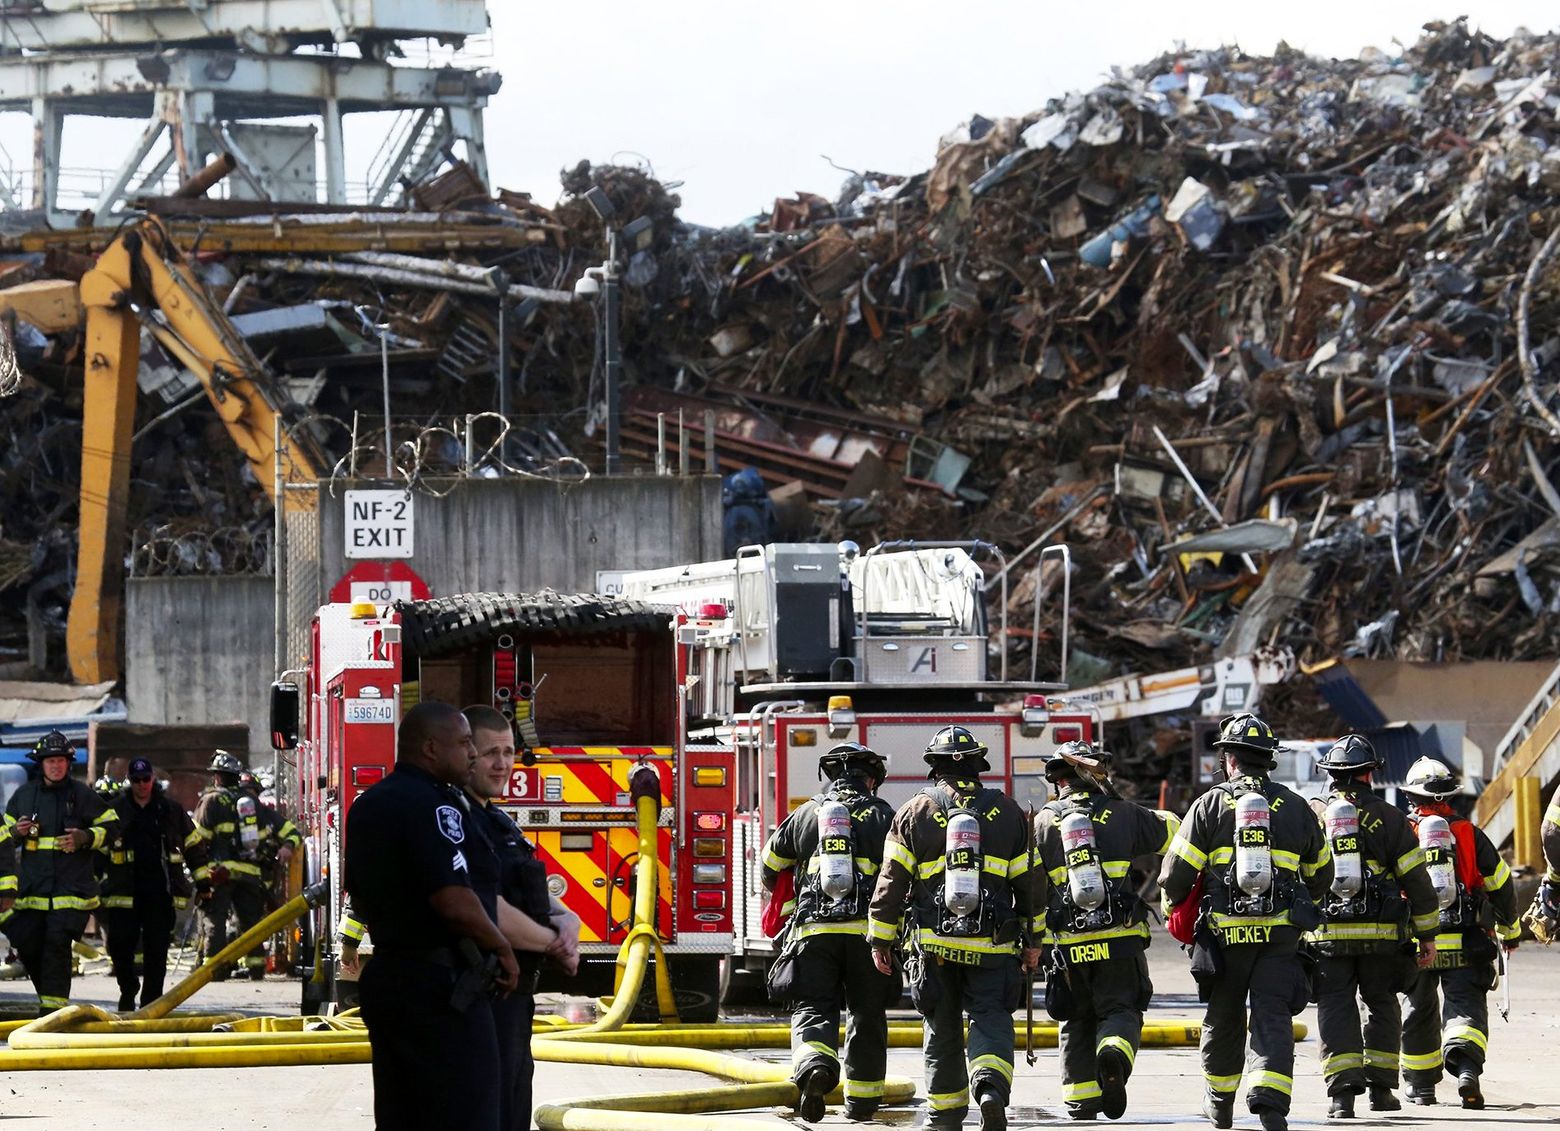 Fire at South Seattle metal-recycling facility